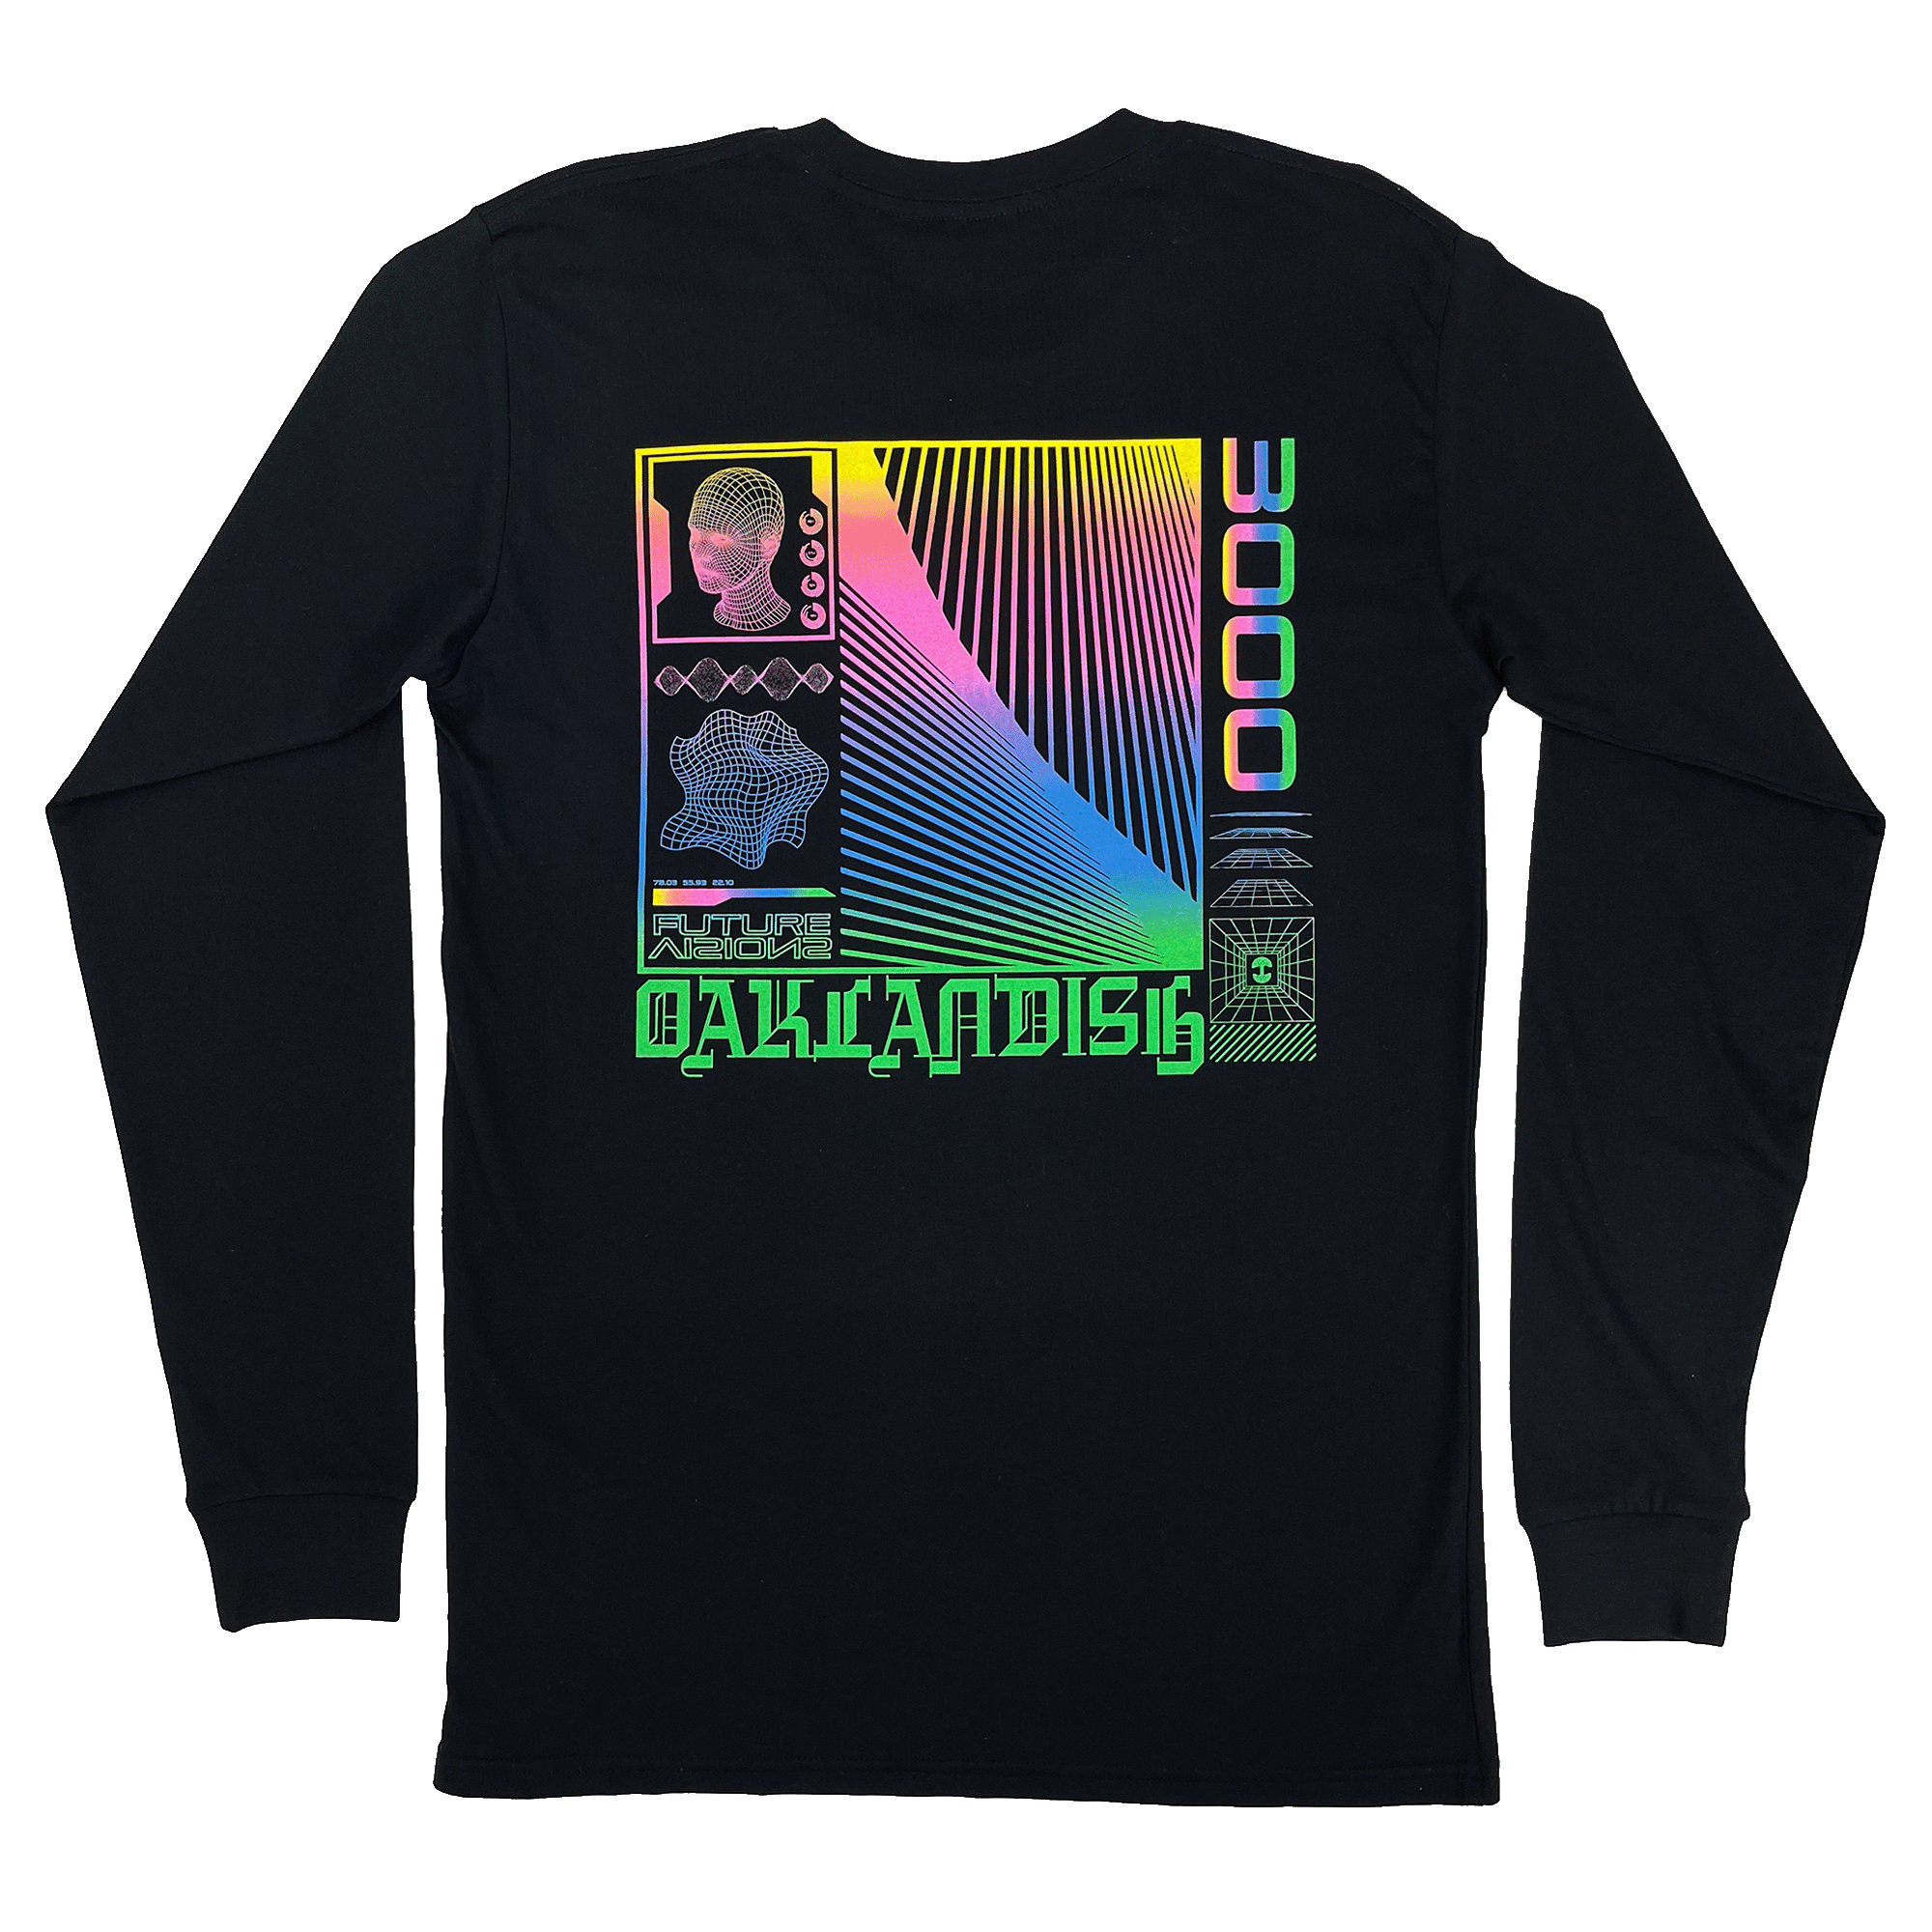 Backside view of black long-sleeve t-shirt with neon pink, yellow, blue, and green futuristic graphic with OAKLANDISH wordmark.